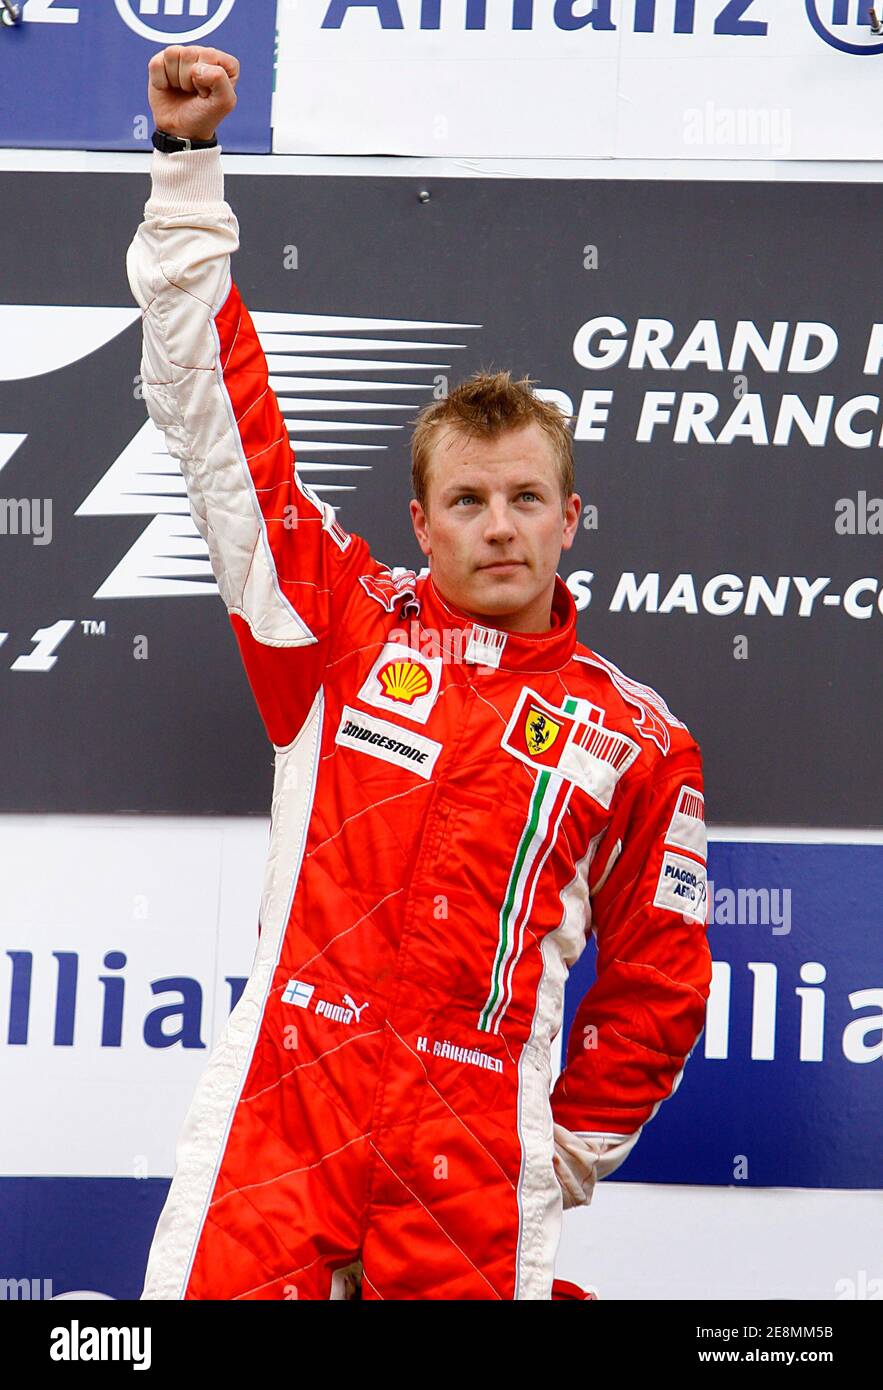 Finnish Formula One driver Kimi Raikkonen of Ferrari celebrates on the  podium after winning the French Grand Prix at the Magny-Cours race track  near Nevers in France July 1, 2007. Photo by